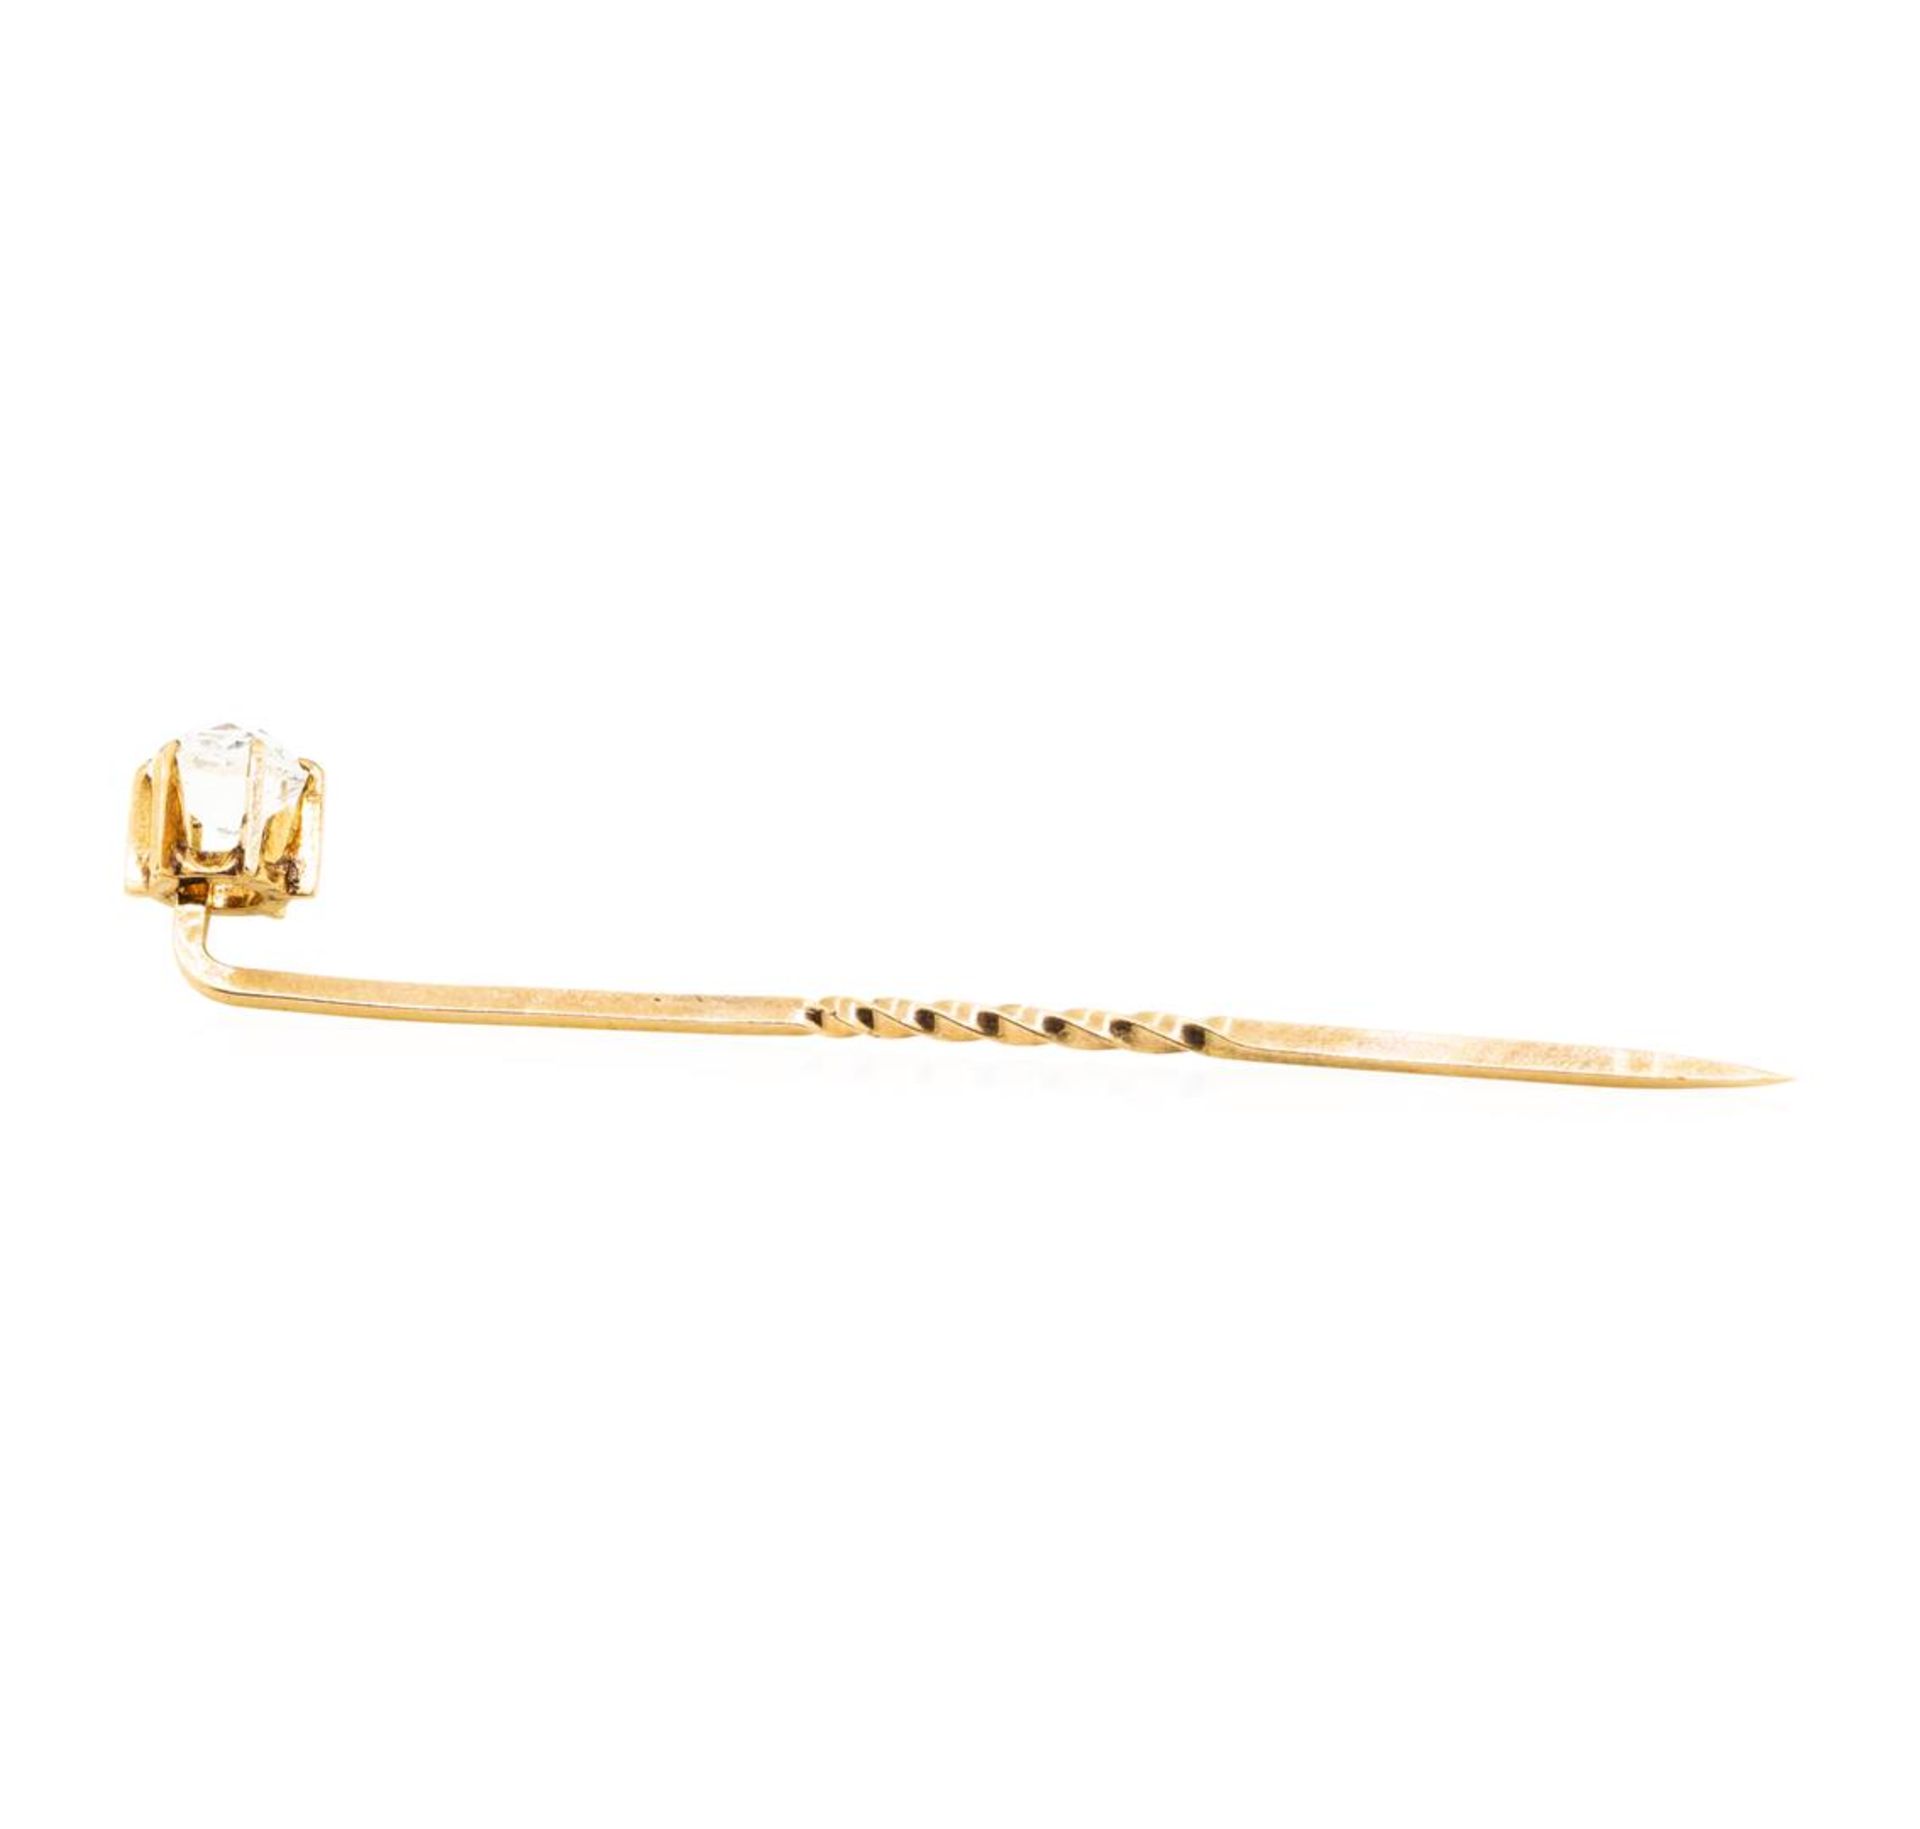 White Crystal Stick Pin - 10KT Yellow - Image 2 of 2